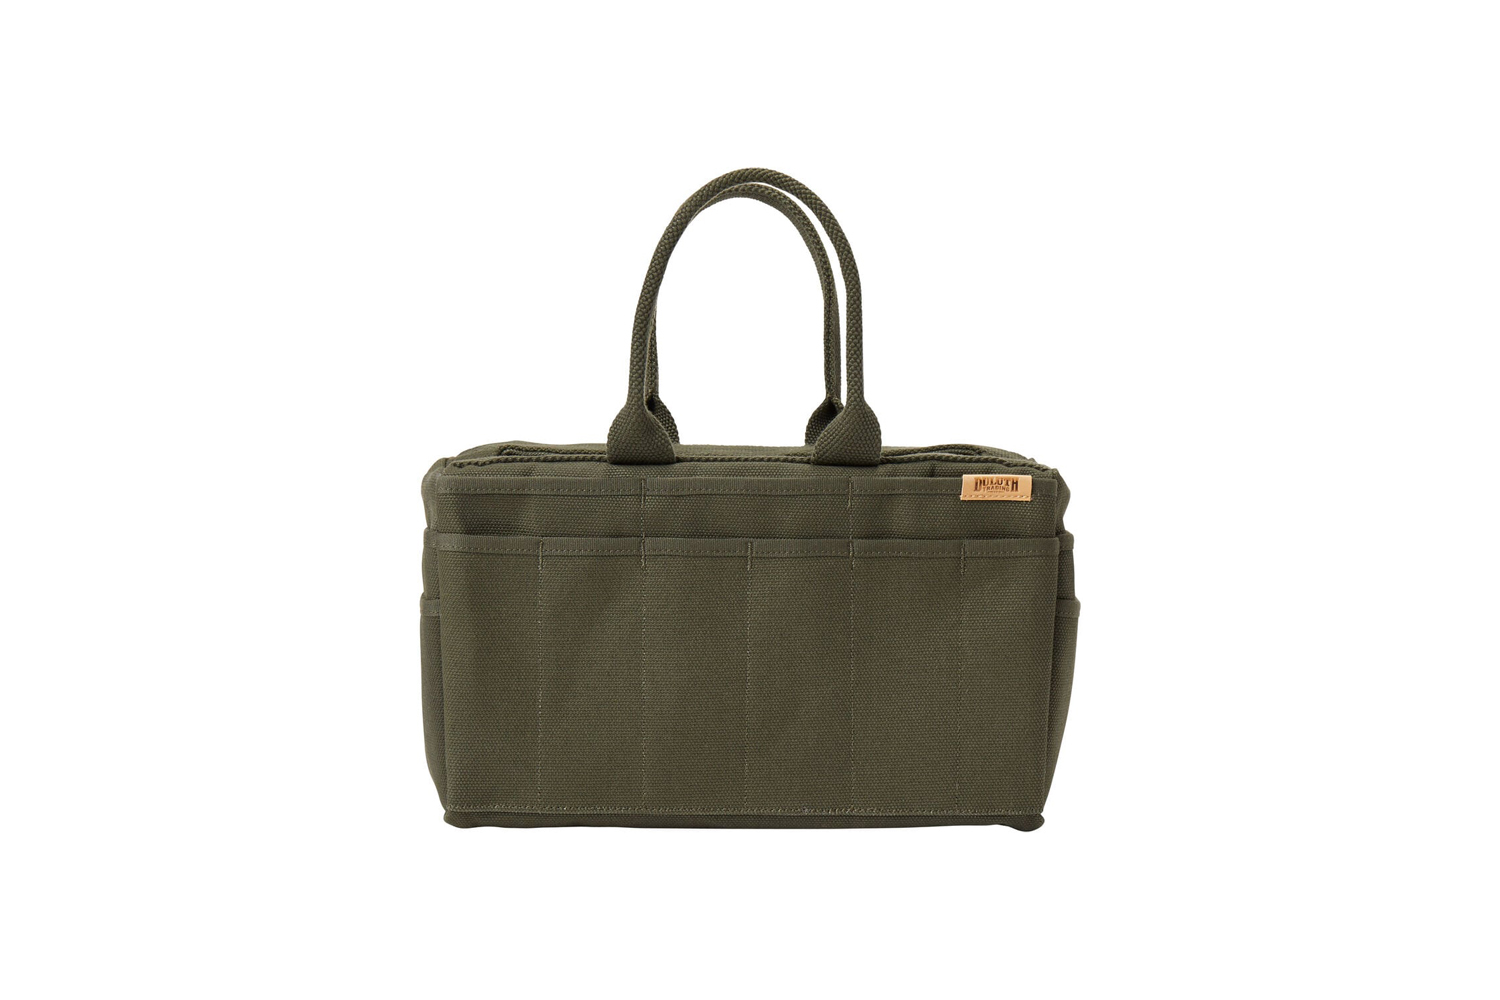 the duluth trading co. canvas riggers bag is $32.95. 18